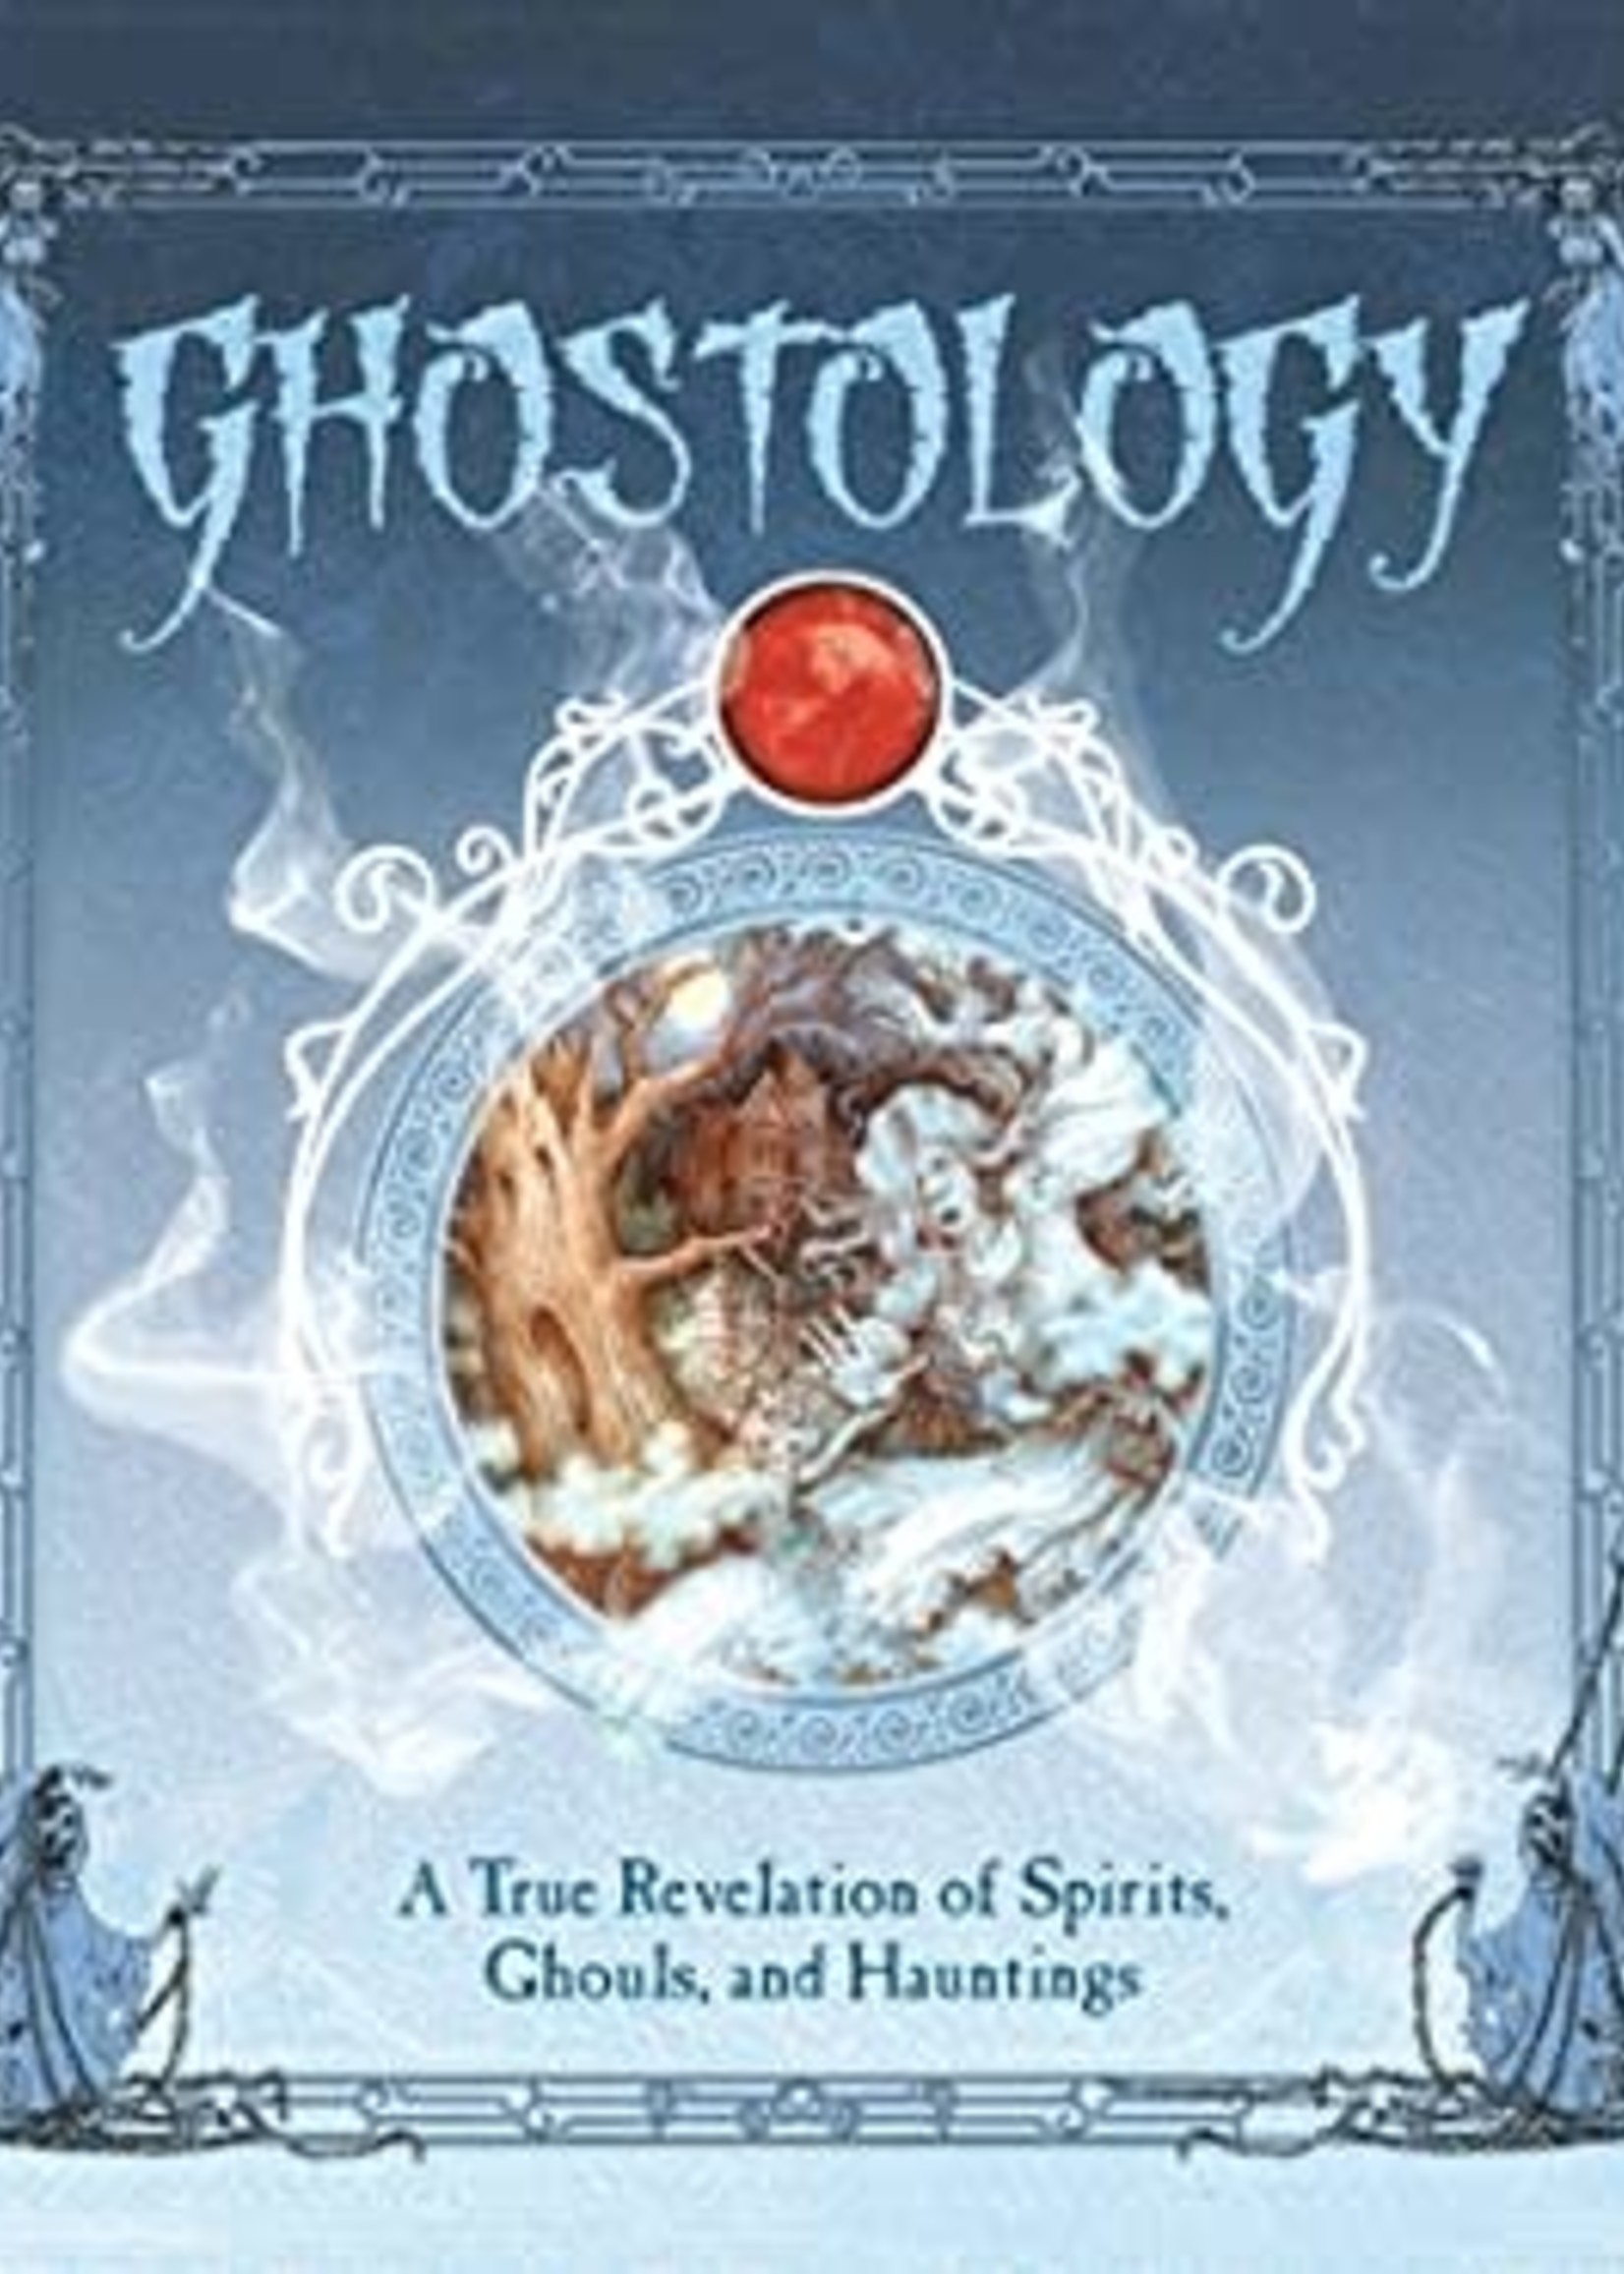 Ghostology: A True Revelation of Spirits, Ghouls, and Hauntings (Ologies #15) by Lucinda Curtle